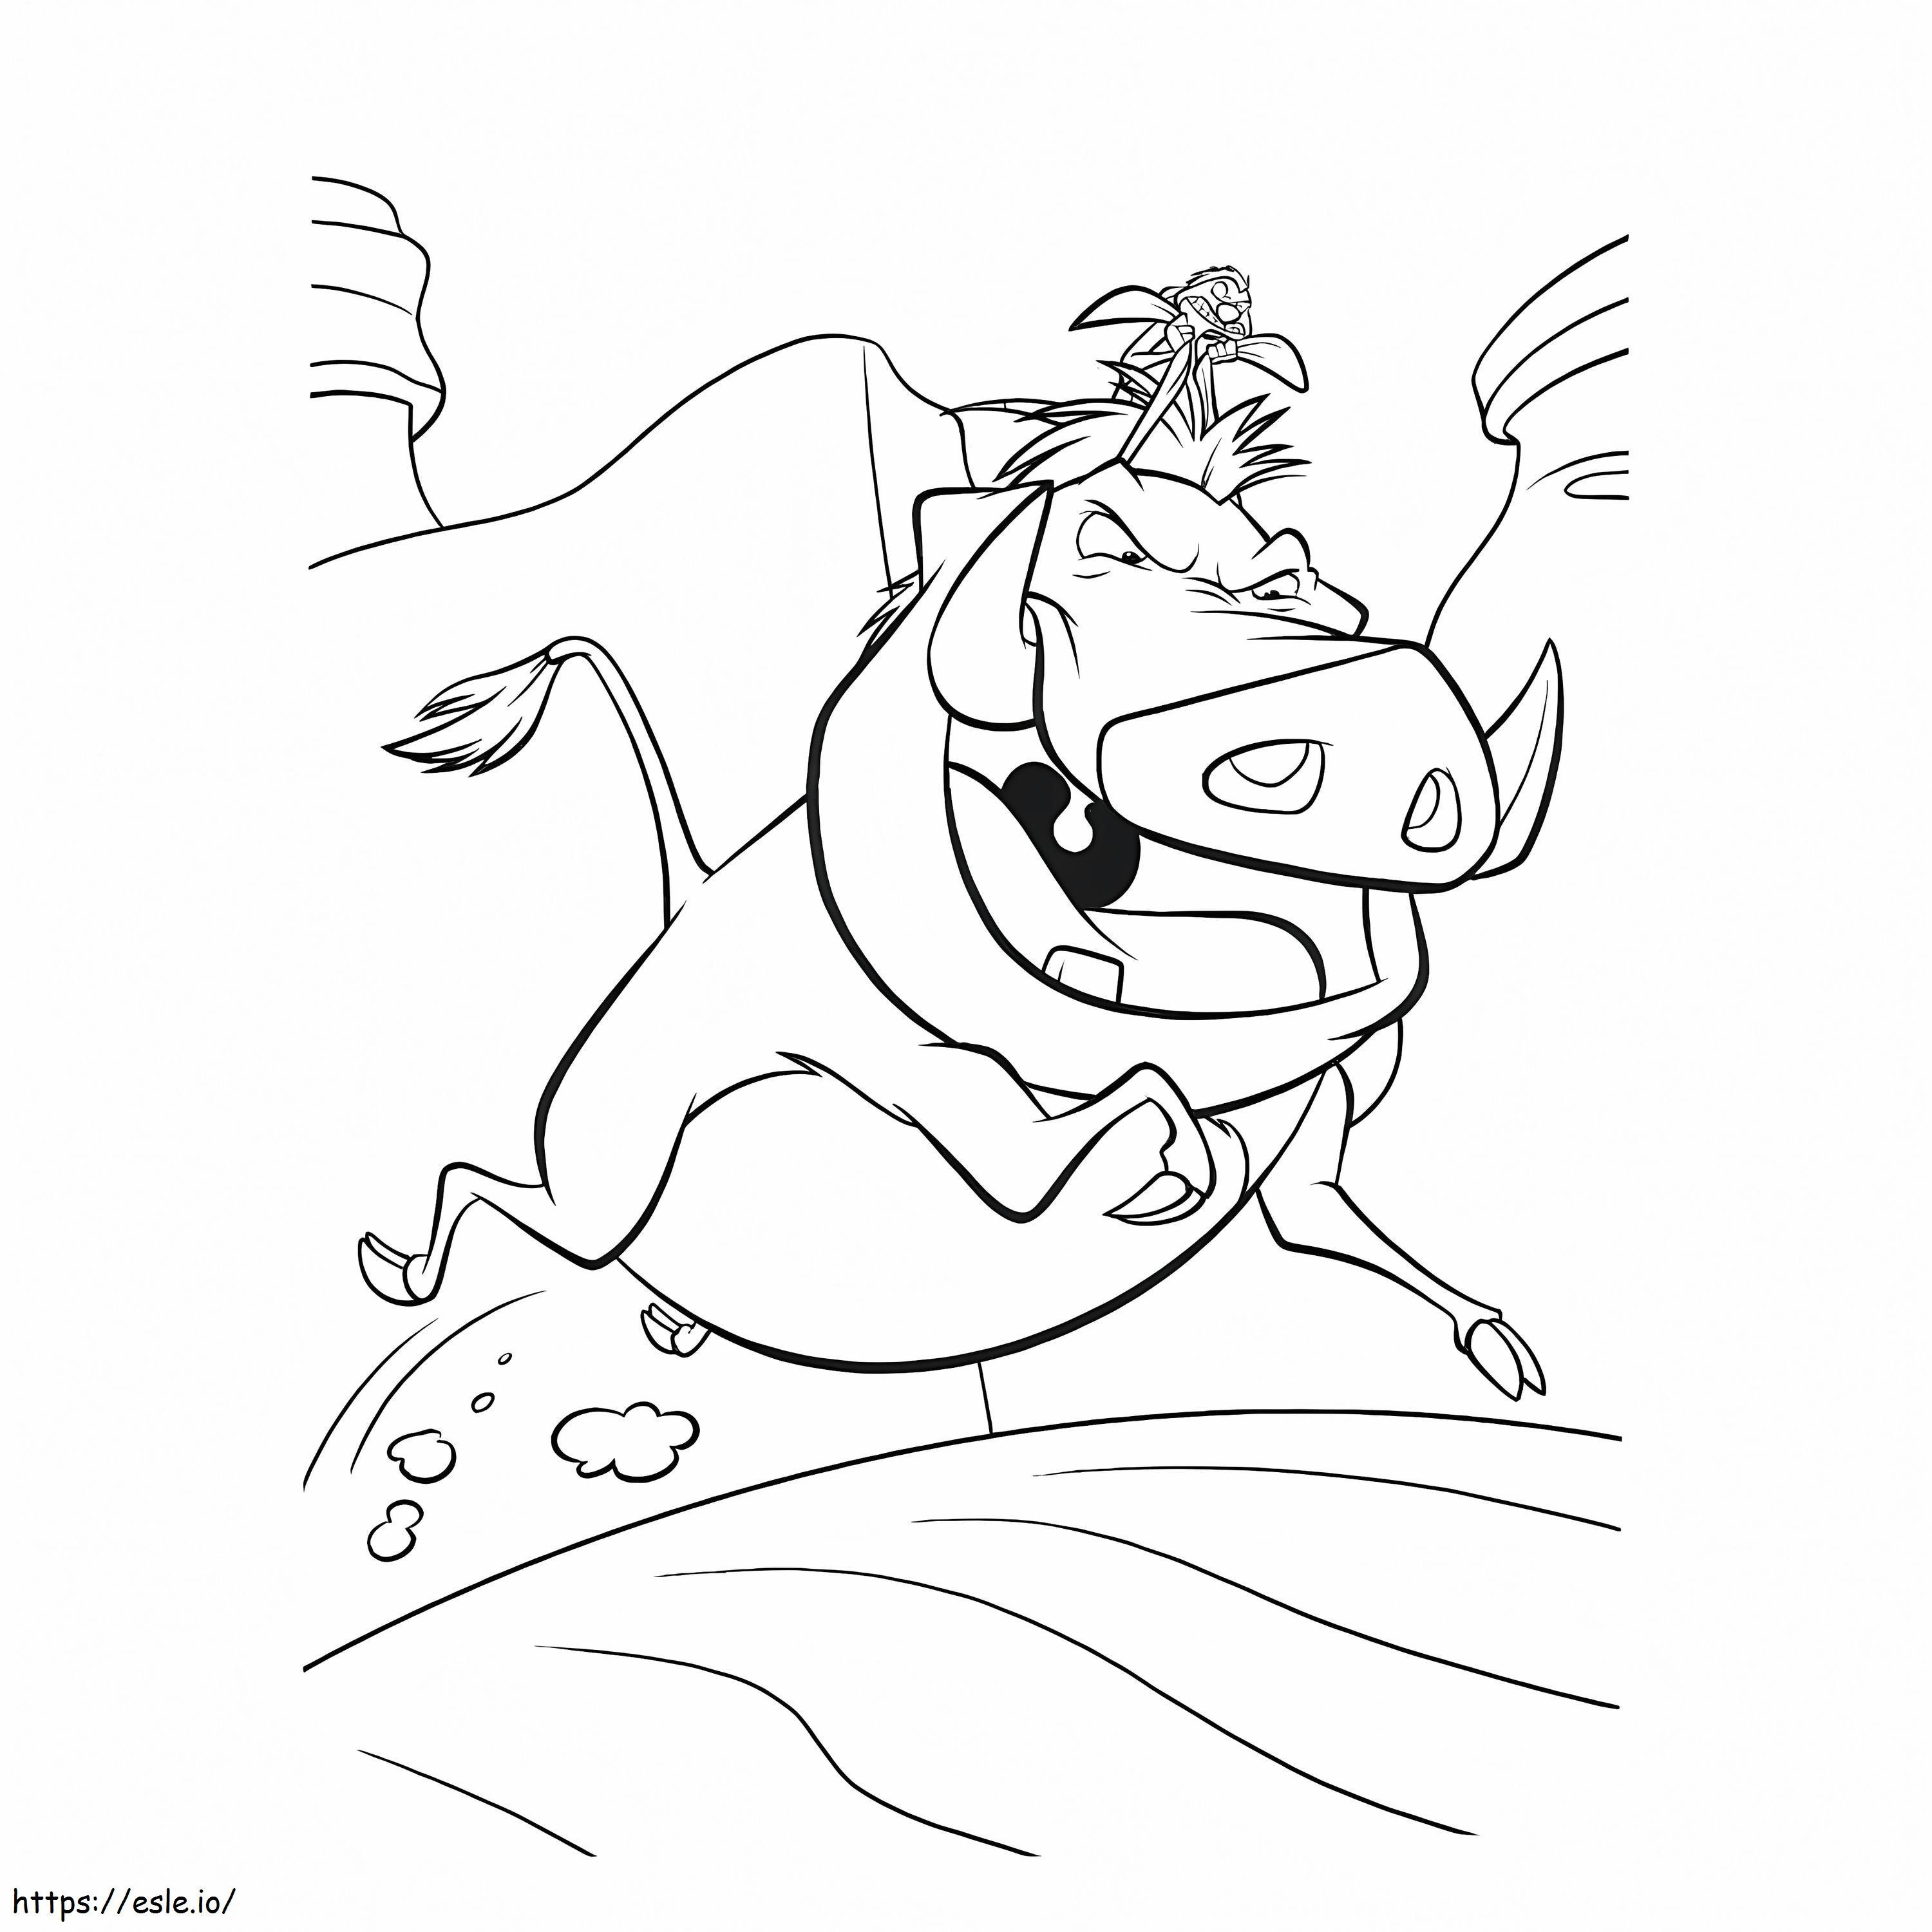 Timon And Pumbaa Running coloring page